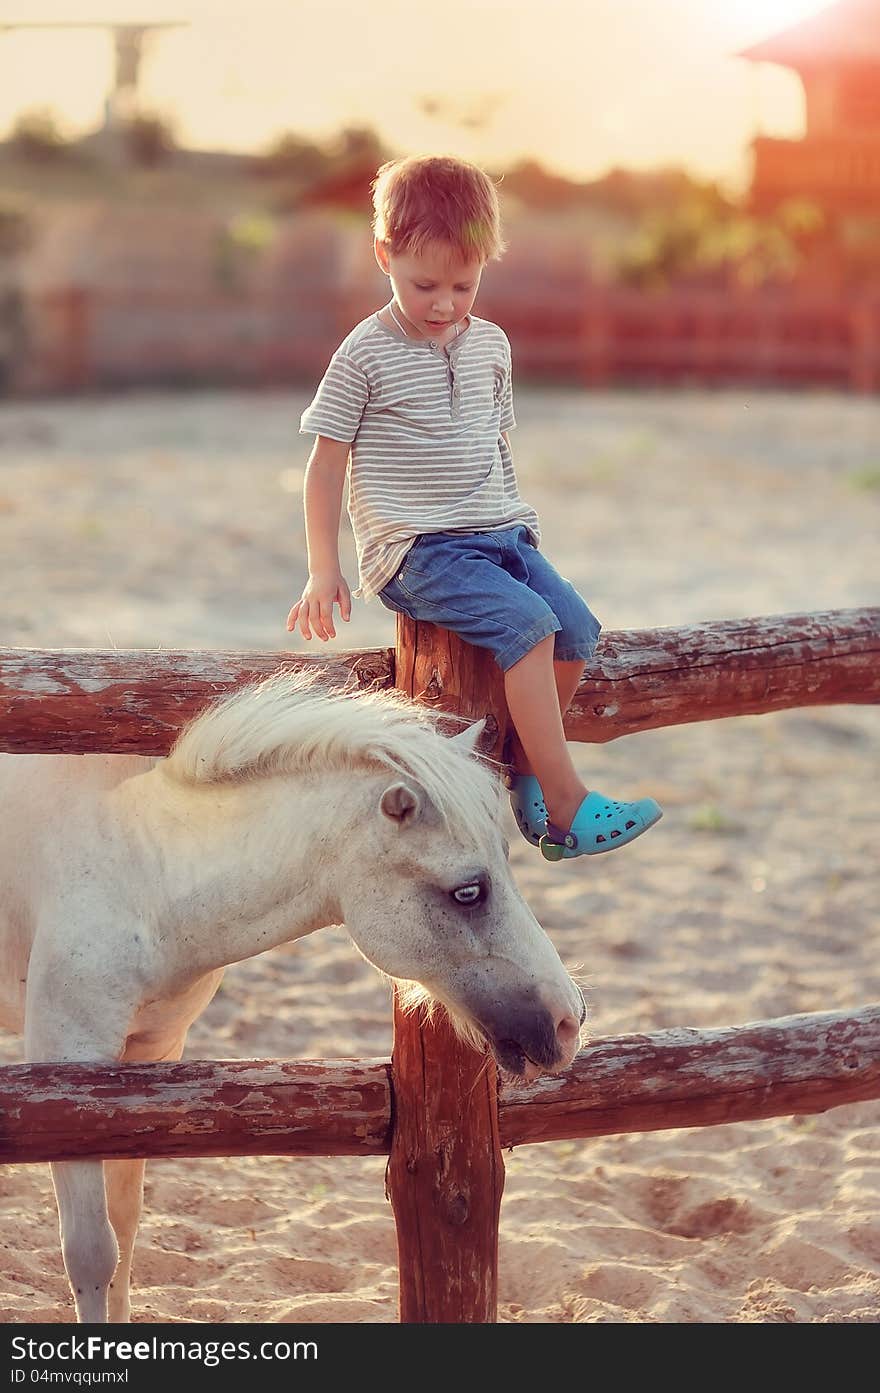 On a farm the boy in jeans with white a pony gets acquainted. On a farm the boy in jeans with white a pony gets acquainted